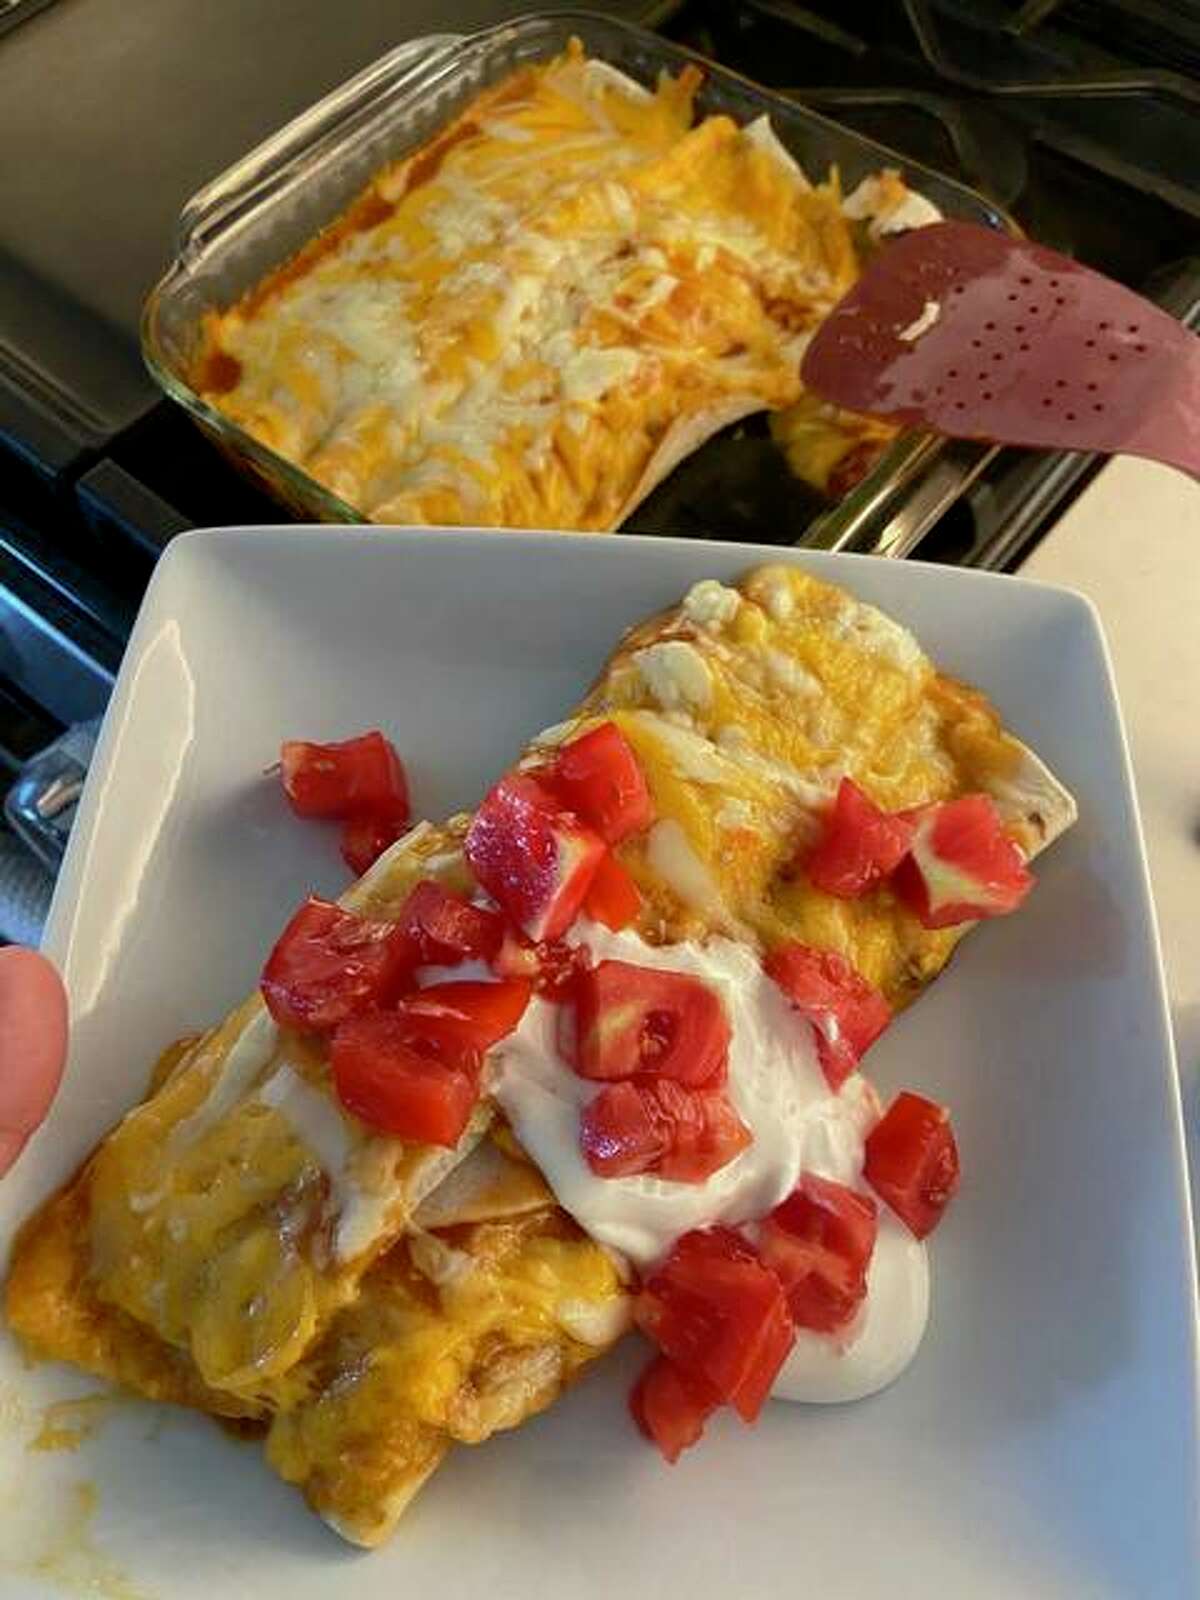 Tex-Mex Enchiladas make for a quick meal during the weekday.